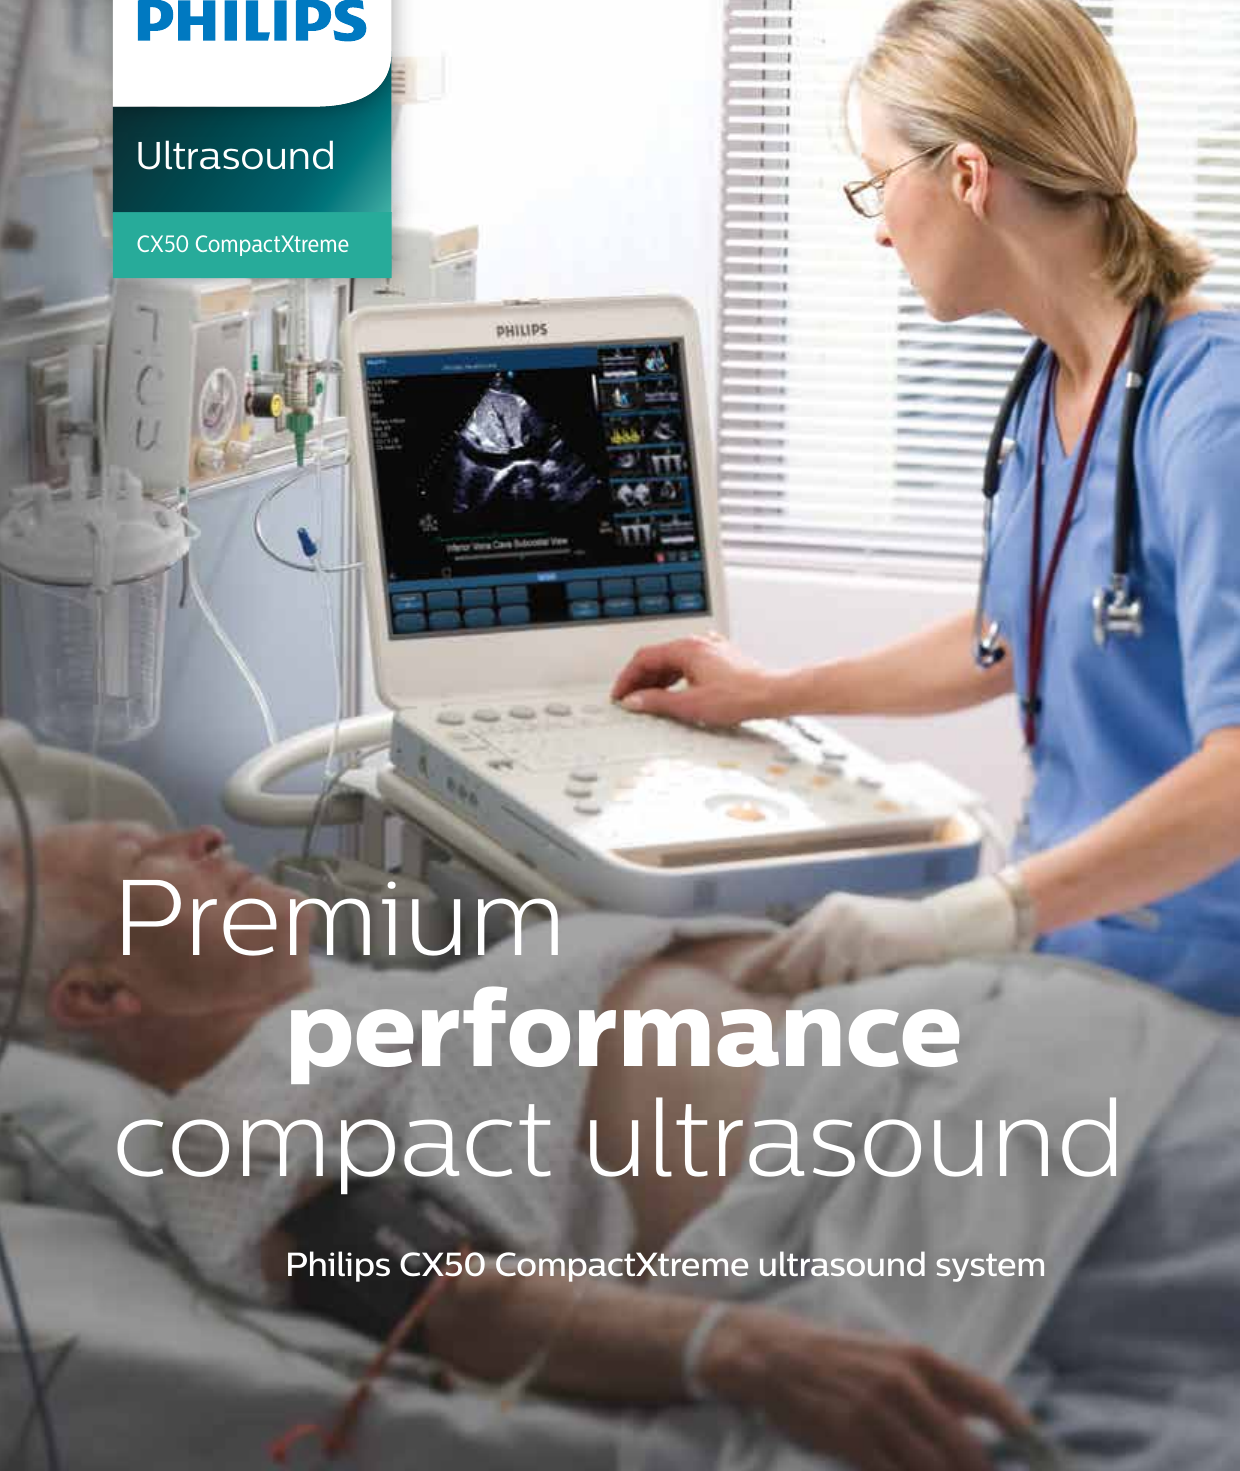 Page 1 of 8 - Philips 795076GI User Manual Product Brochure CX50 General Imaging Ultrasound System Cbcd5c5549d14fa096b2a77c0161aee4